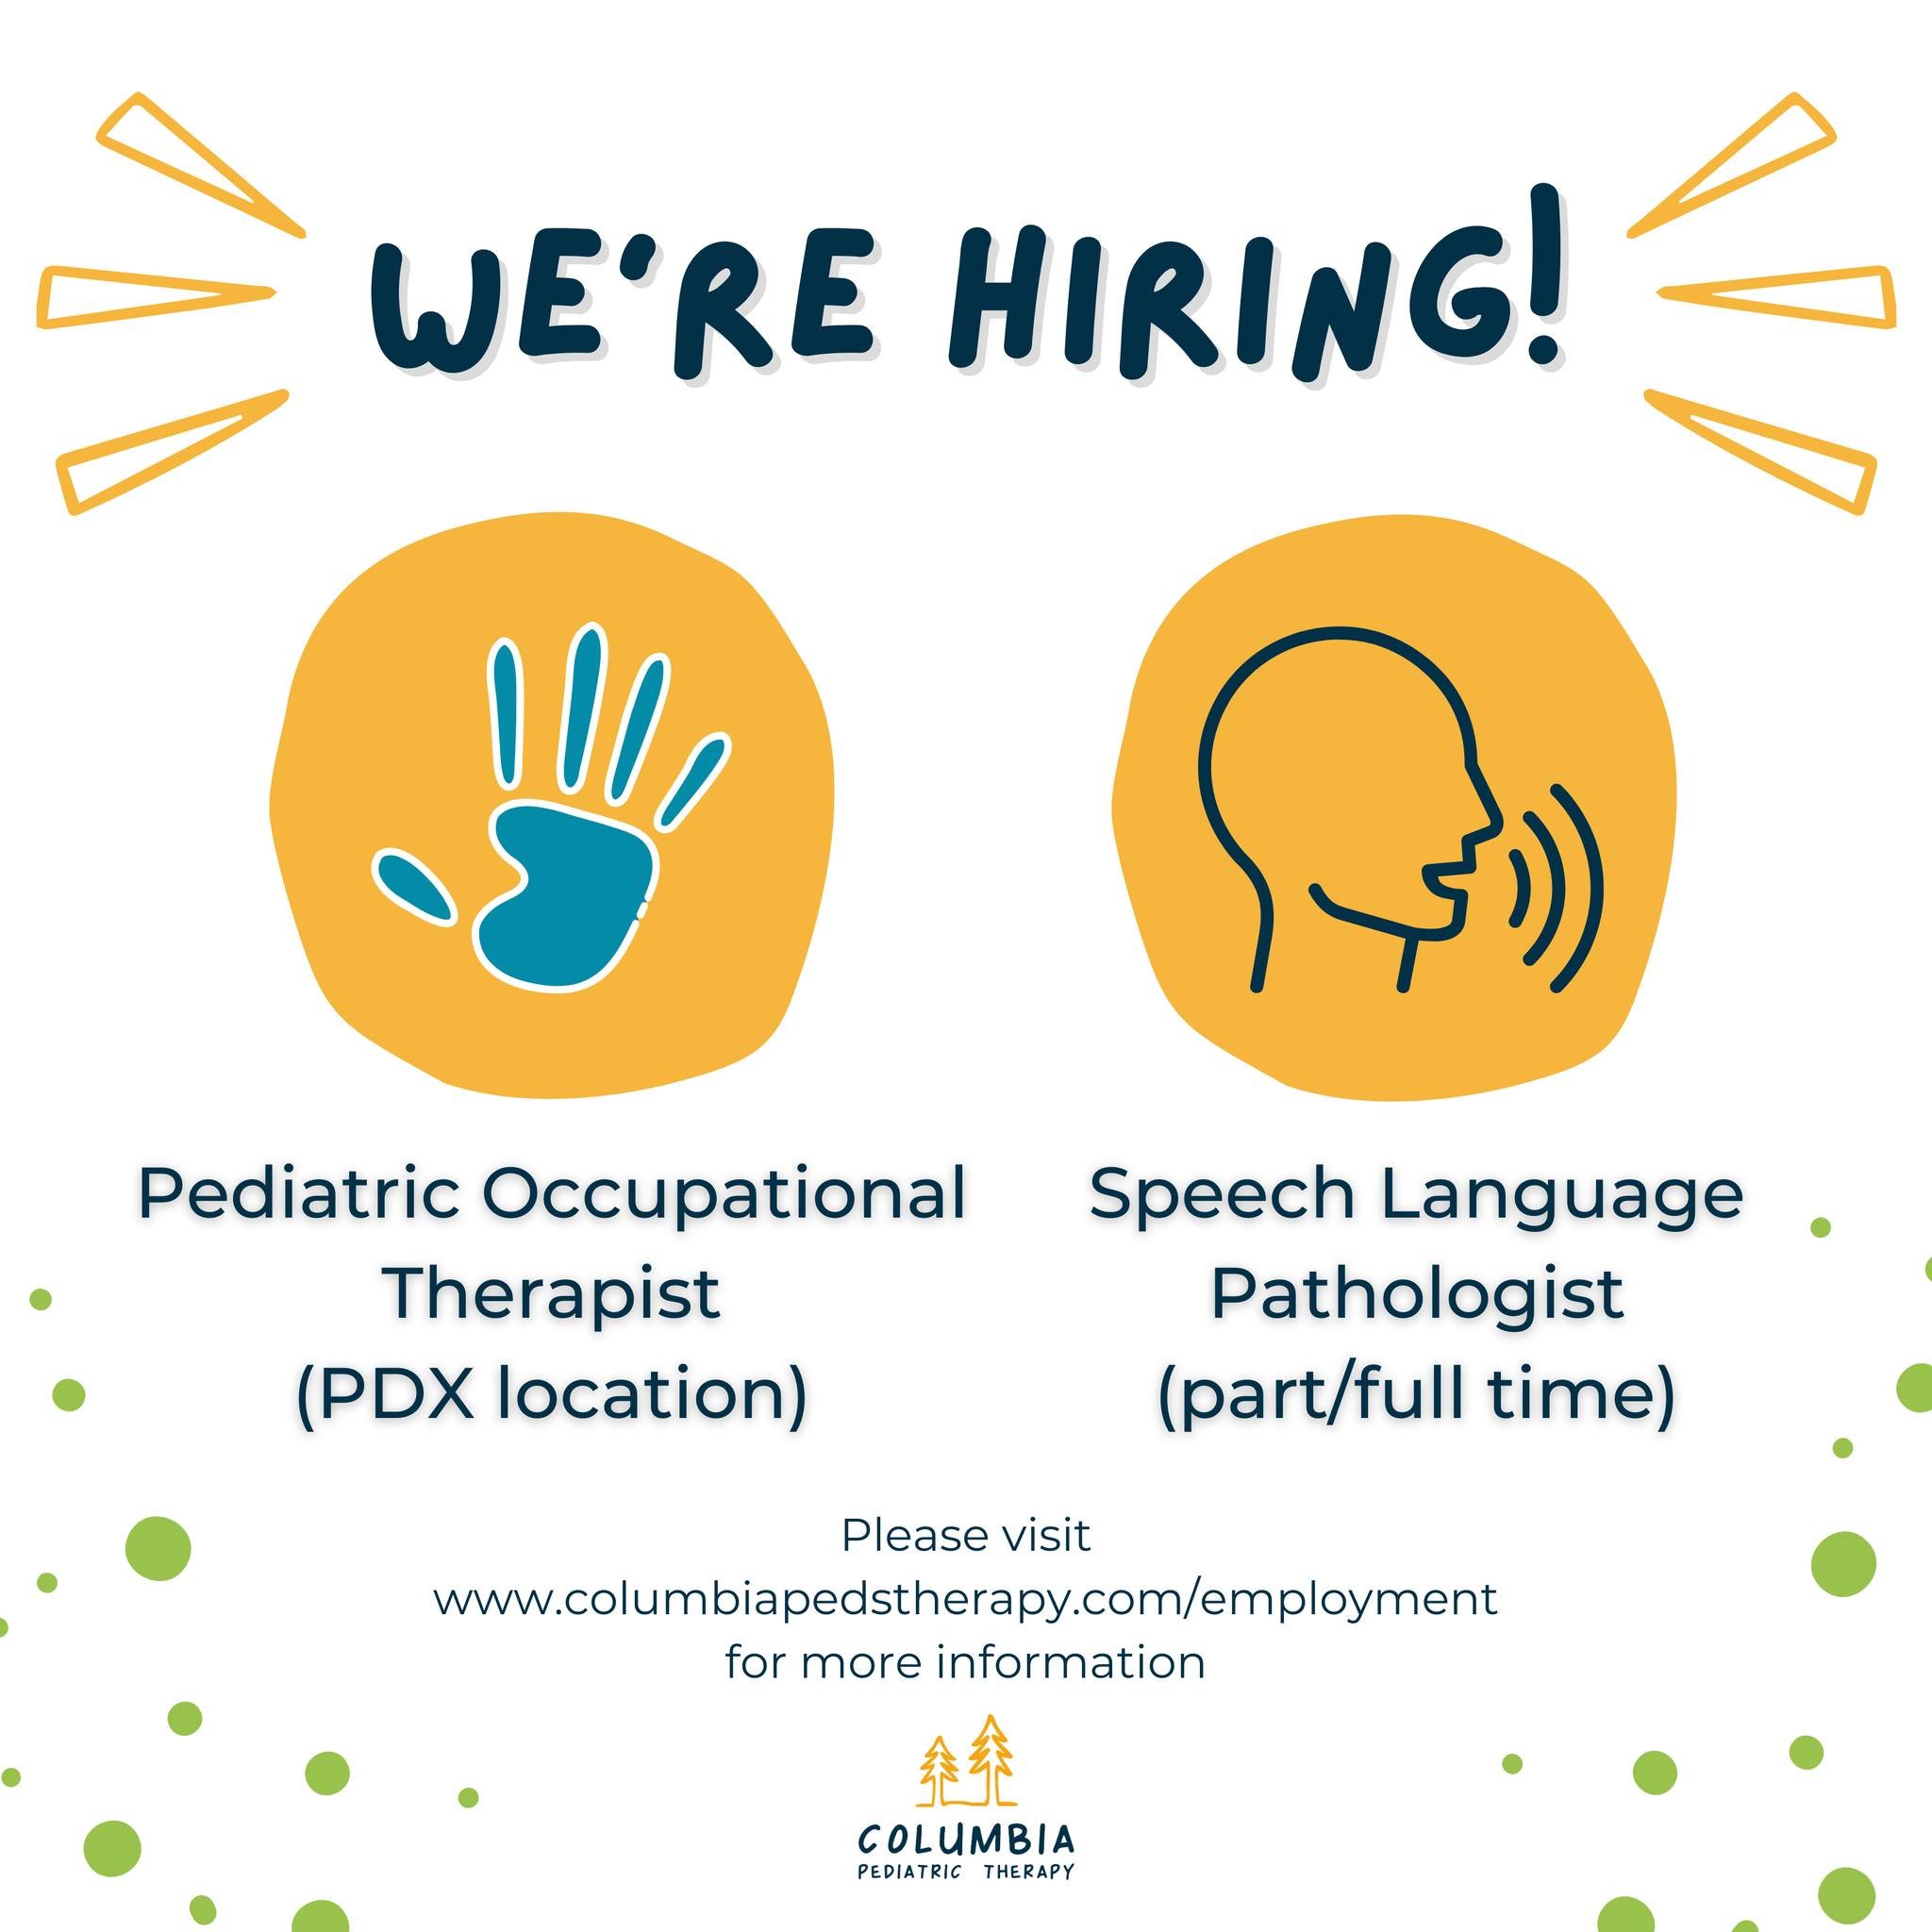 We are growing quickly - and on the search for new team members! Do you know anyone looking to join a great clinic?
.
.
.
.
#hiring #WAjobs #pediatrics #OT #SLP